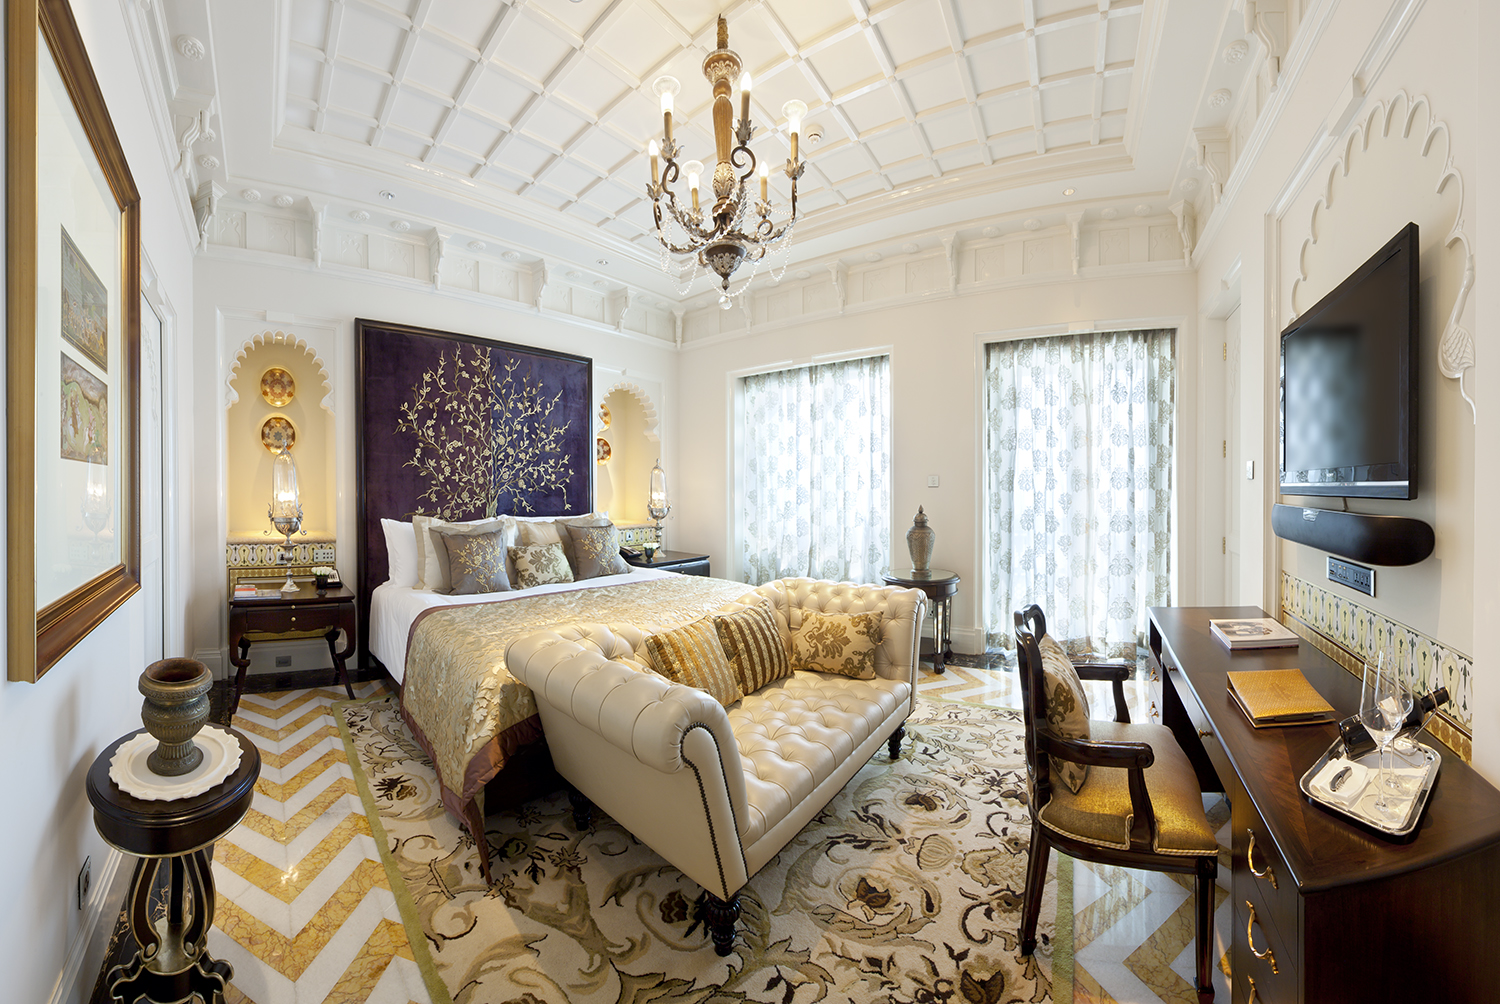 Taj Mahal Palace Top 25 Most Luxurious Rooms in the World - 5